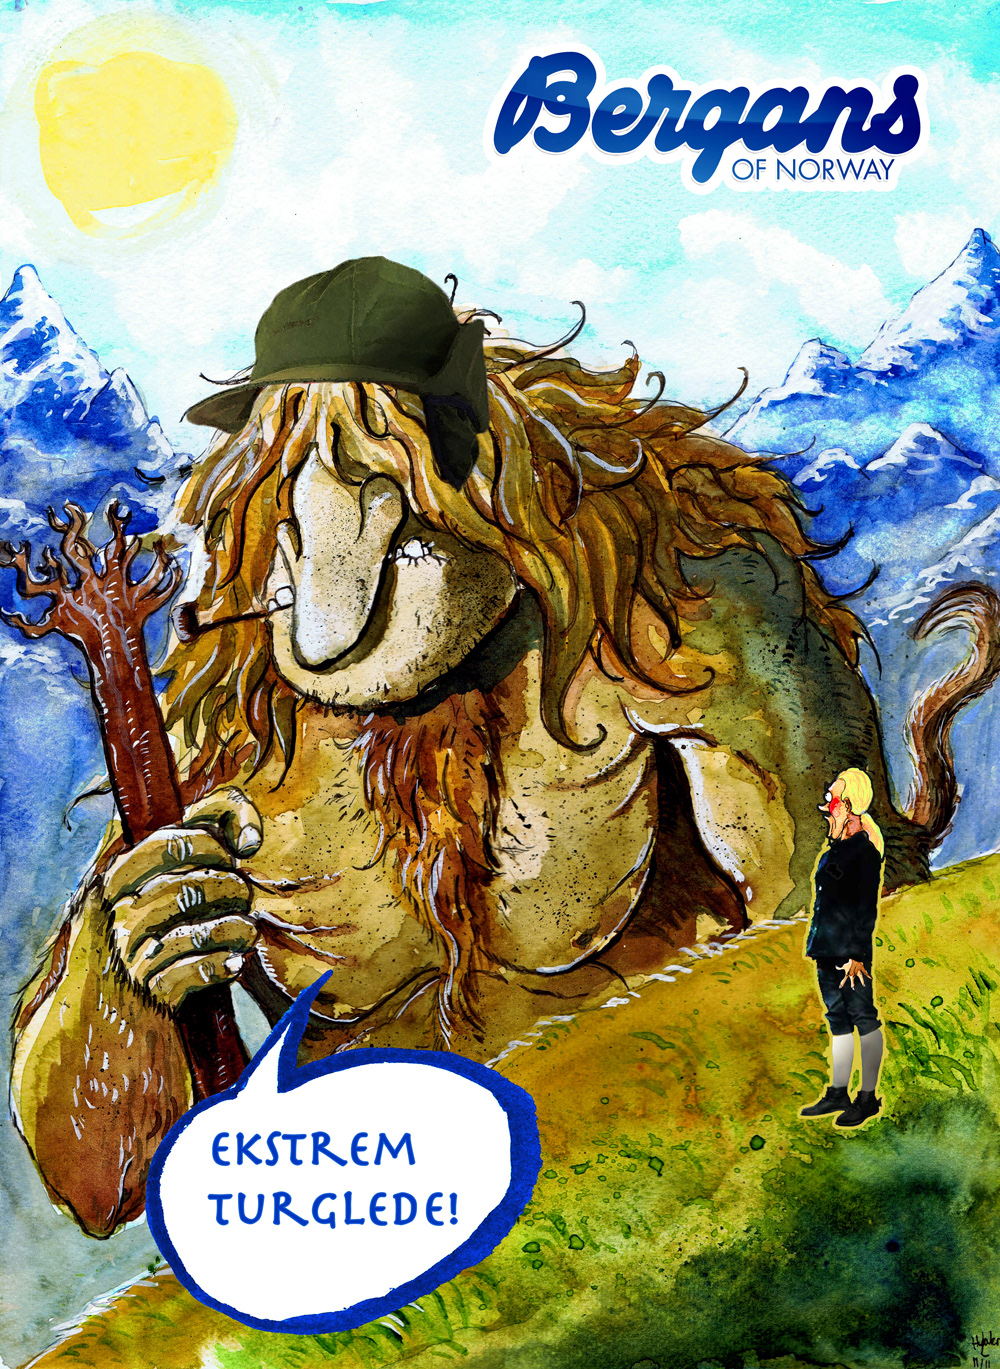 troll bergans norway outdoors draug seamonster watercolor Nature commercial